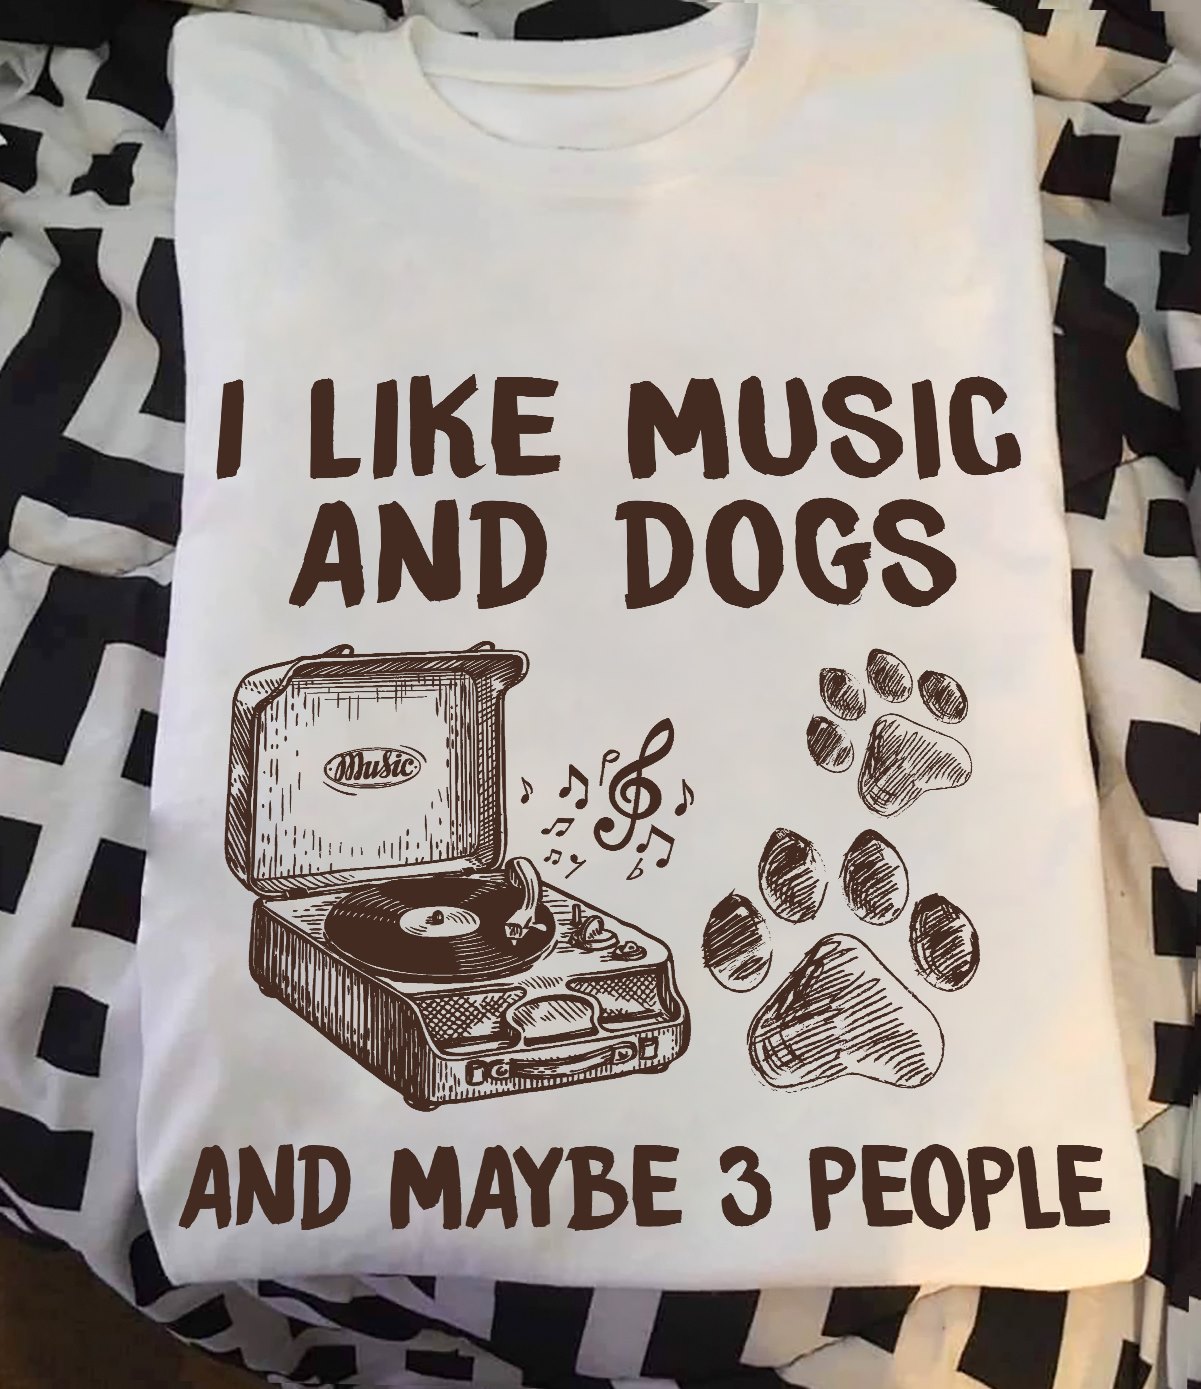 I like music and dogs and maybe 3 people